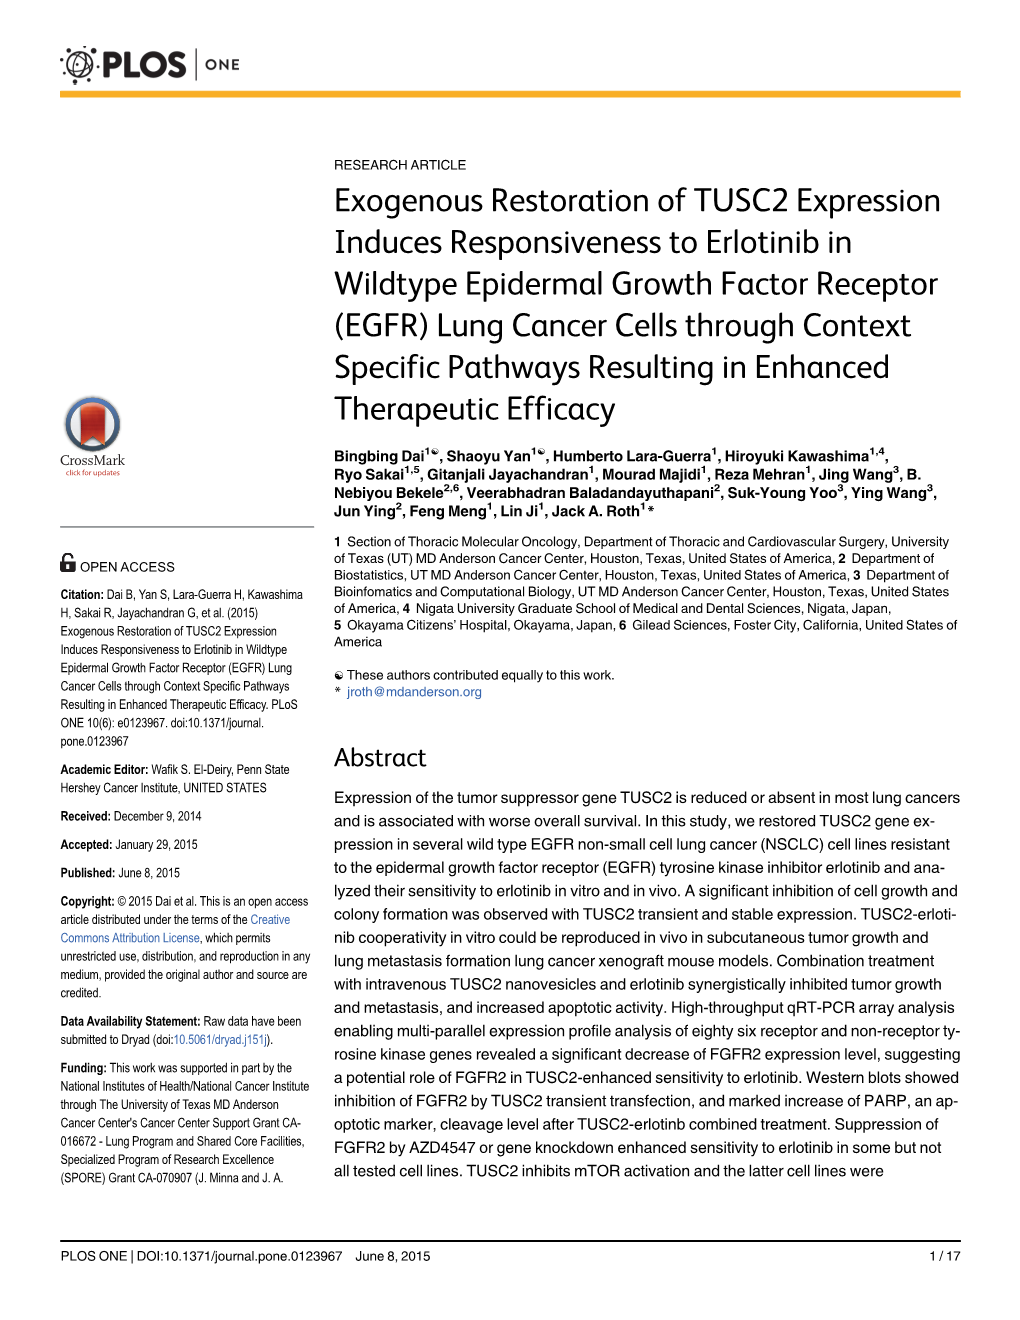 Exogenous Restoration of TUSC2 Expression Induces